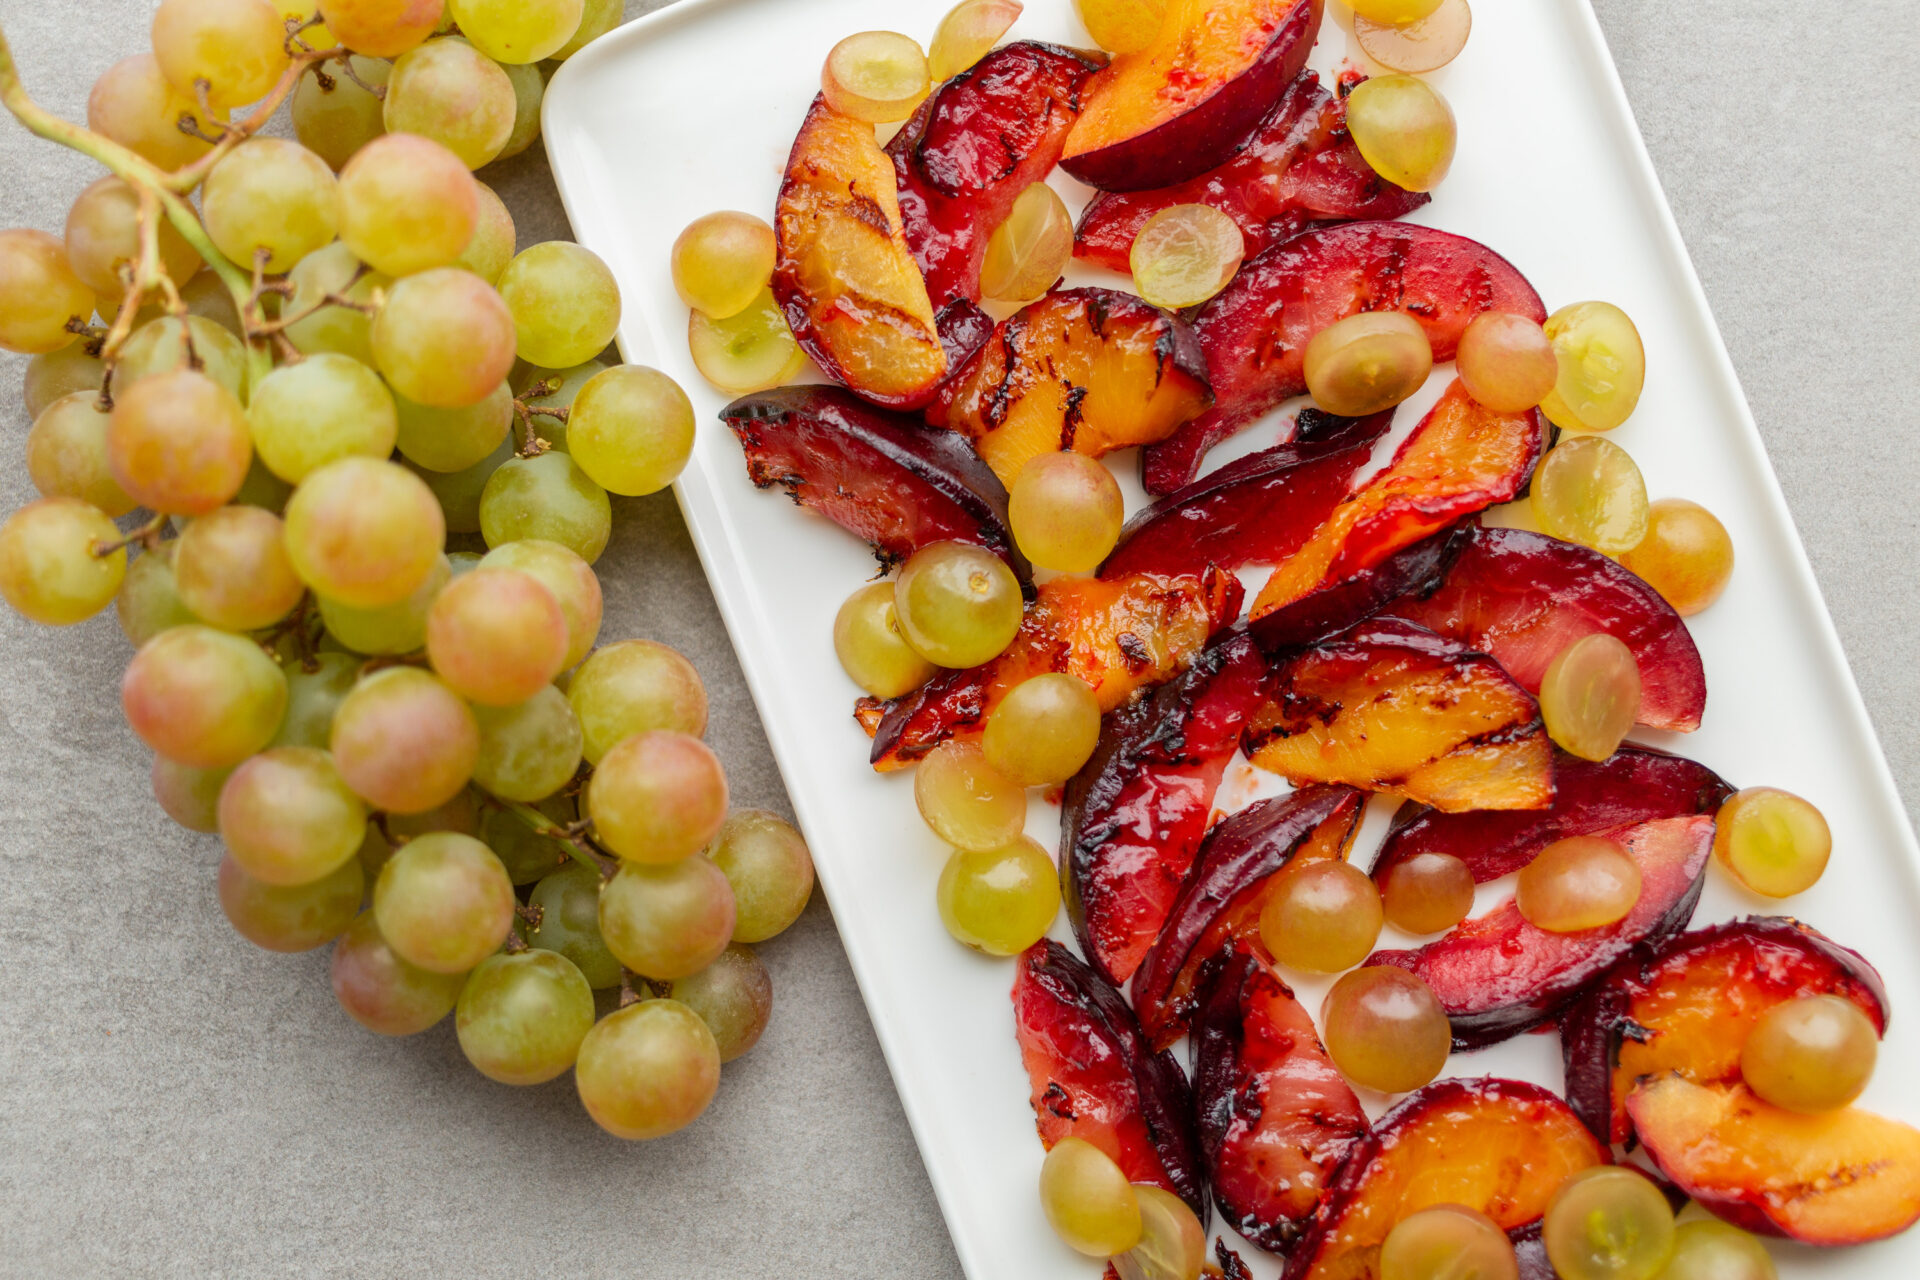 Savory Warm Plums & Muscat grapes